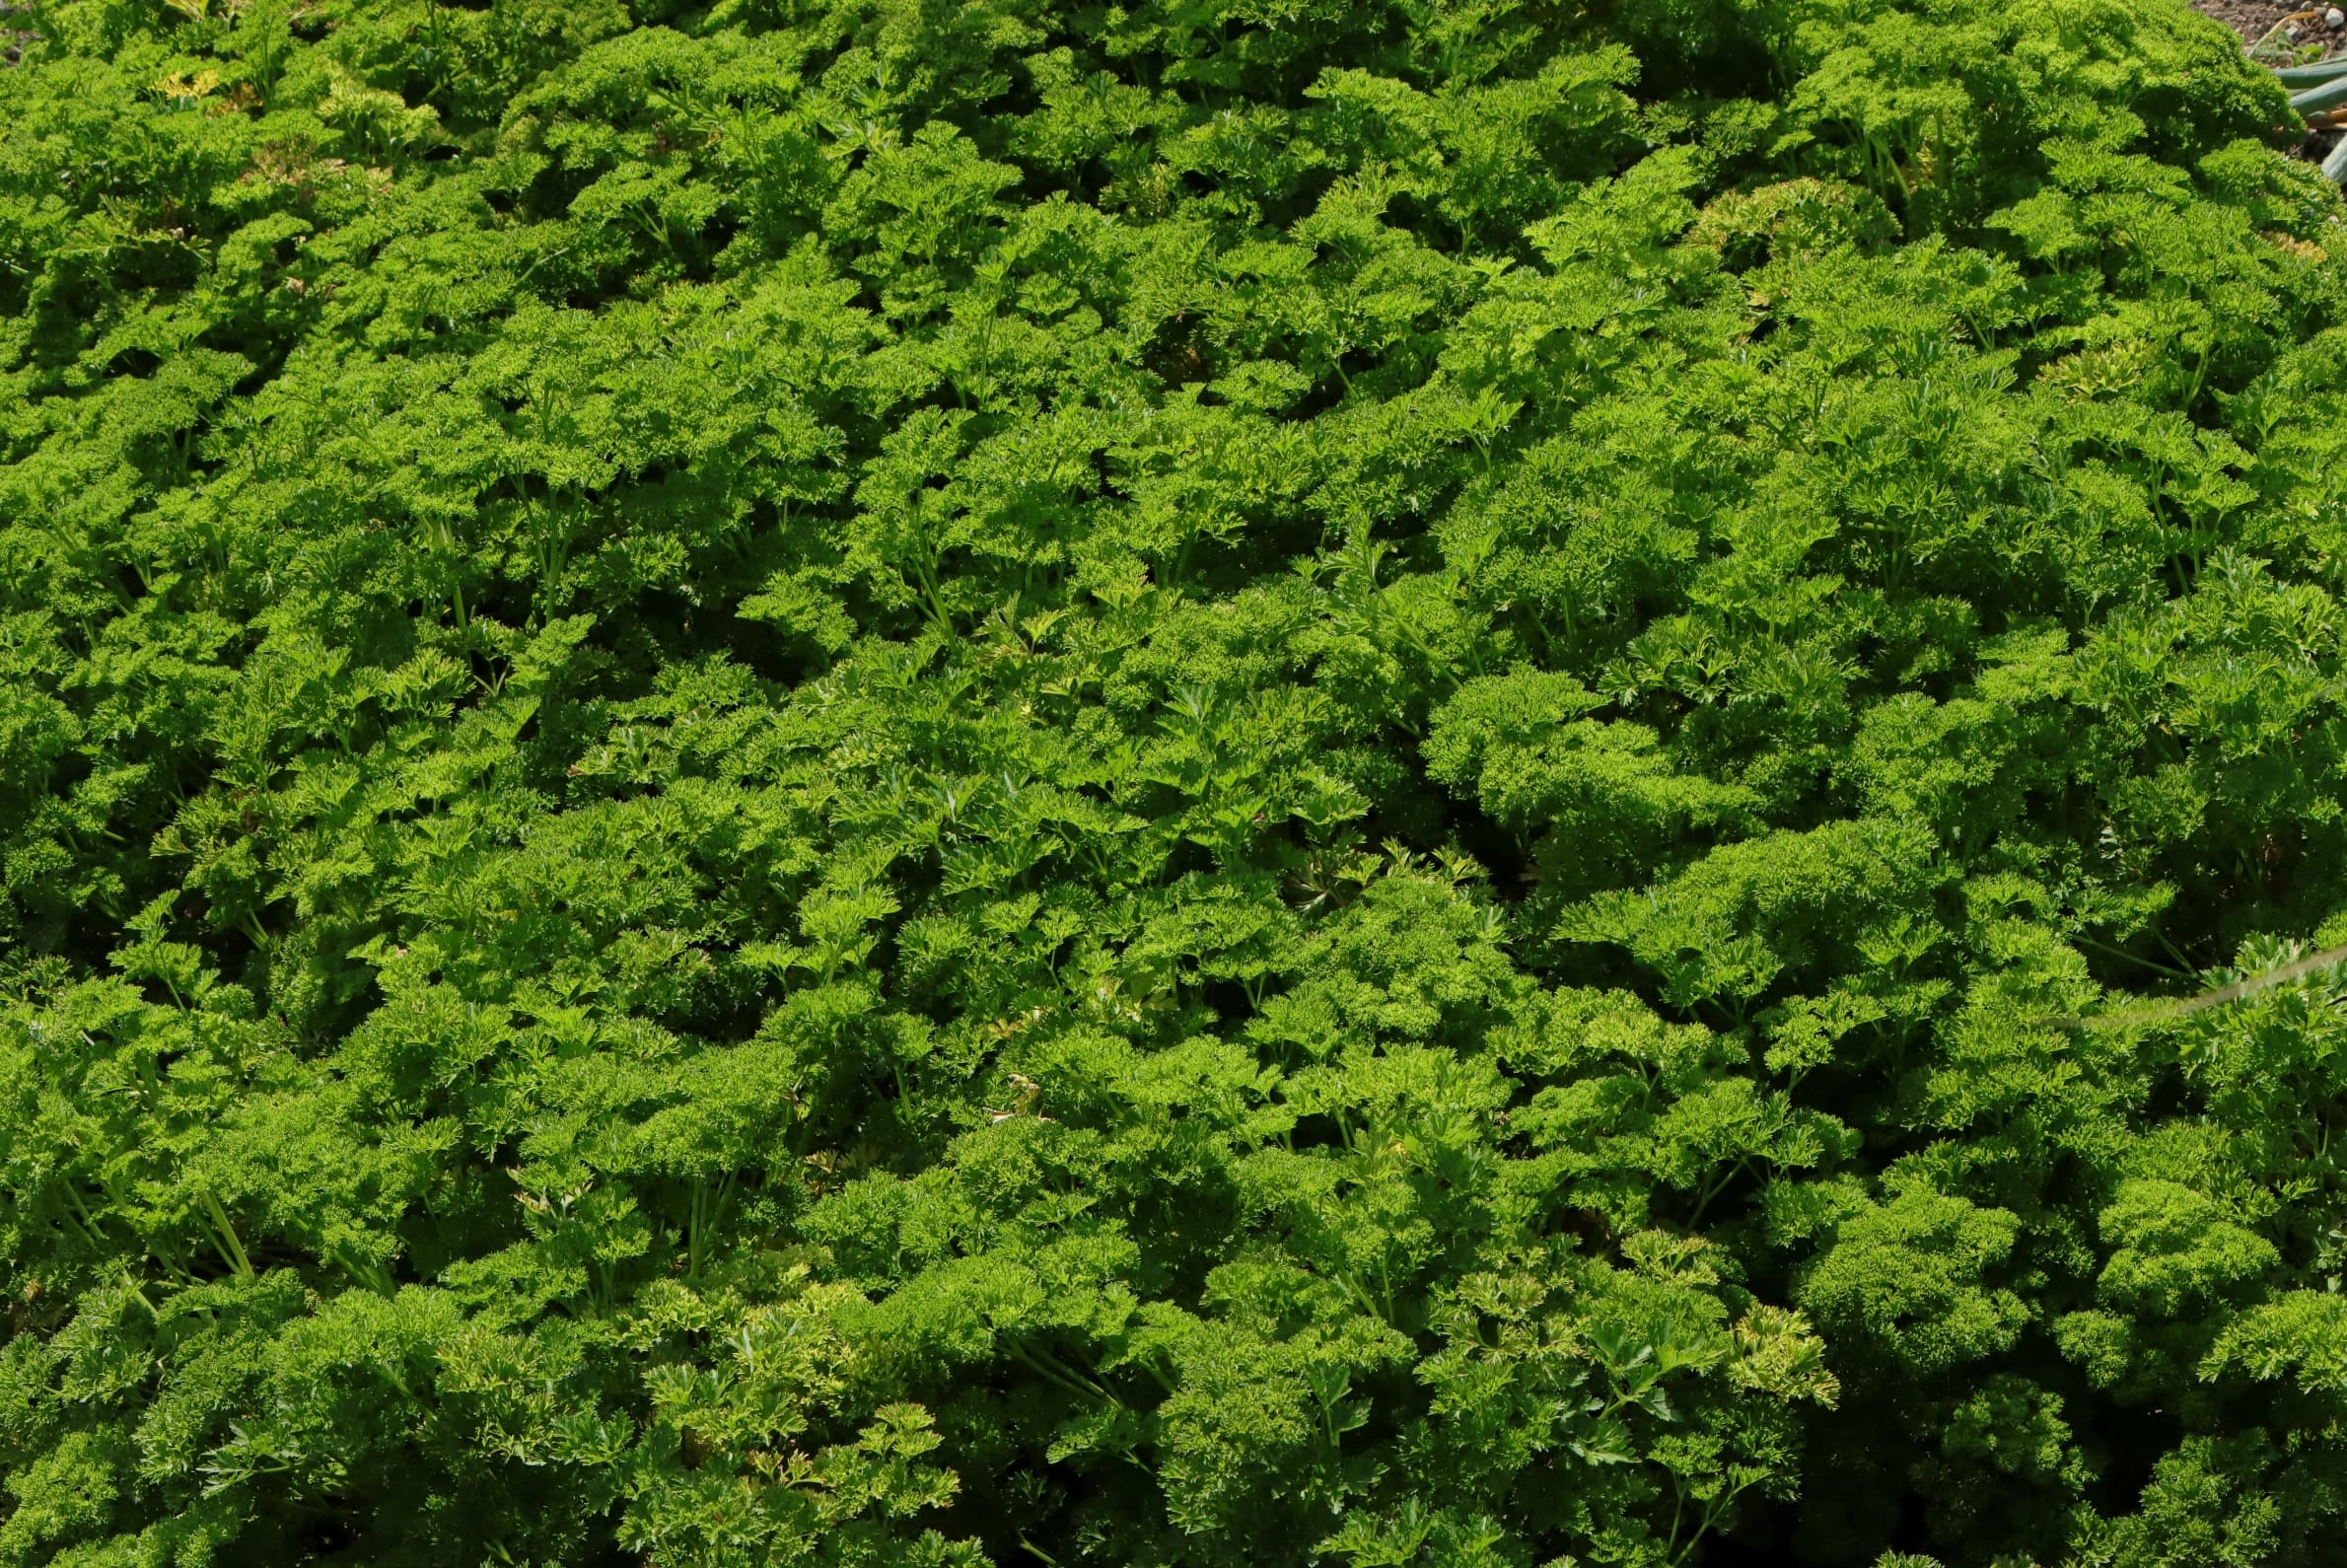 A variety of green coloured curly leaves of parsley.